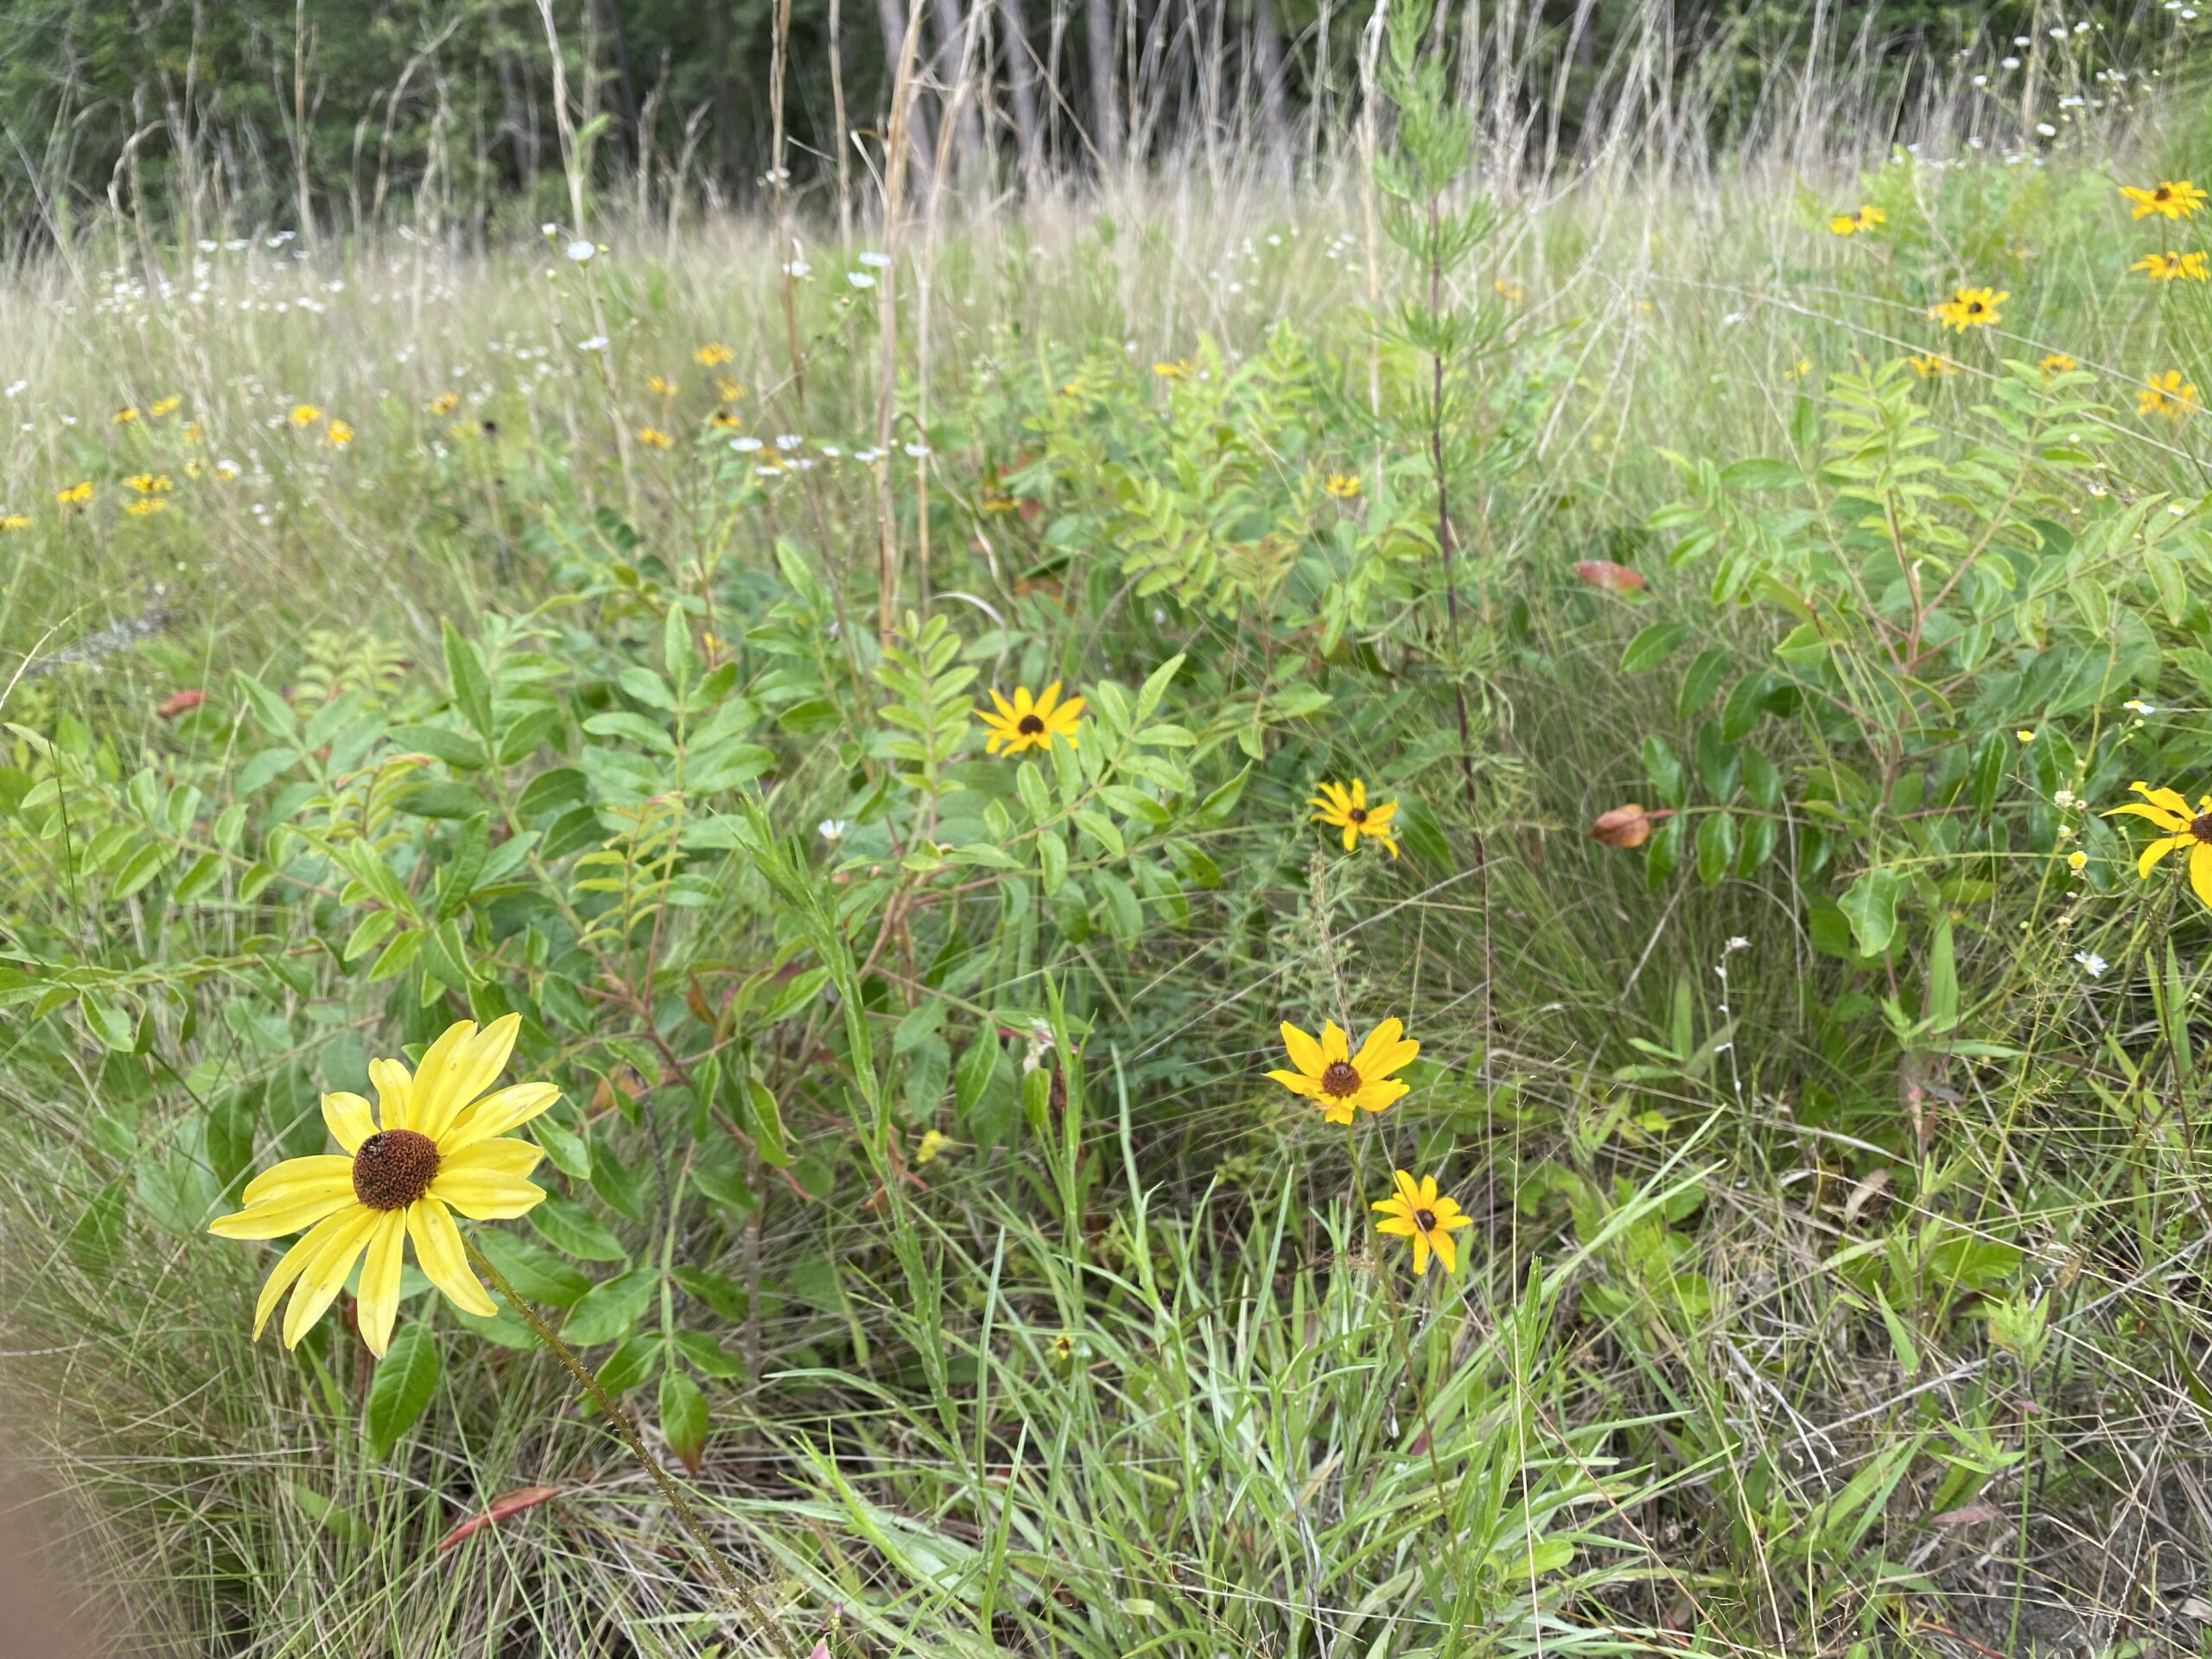 Black eyed susans and asters blooming at the Ohoopee Dunes prairie.